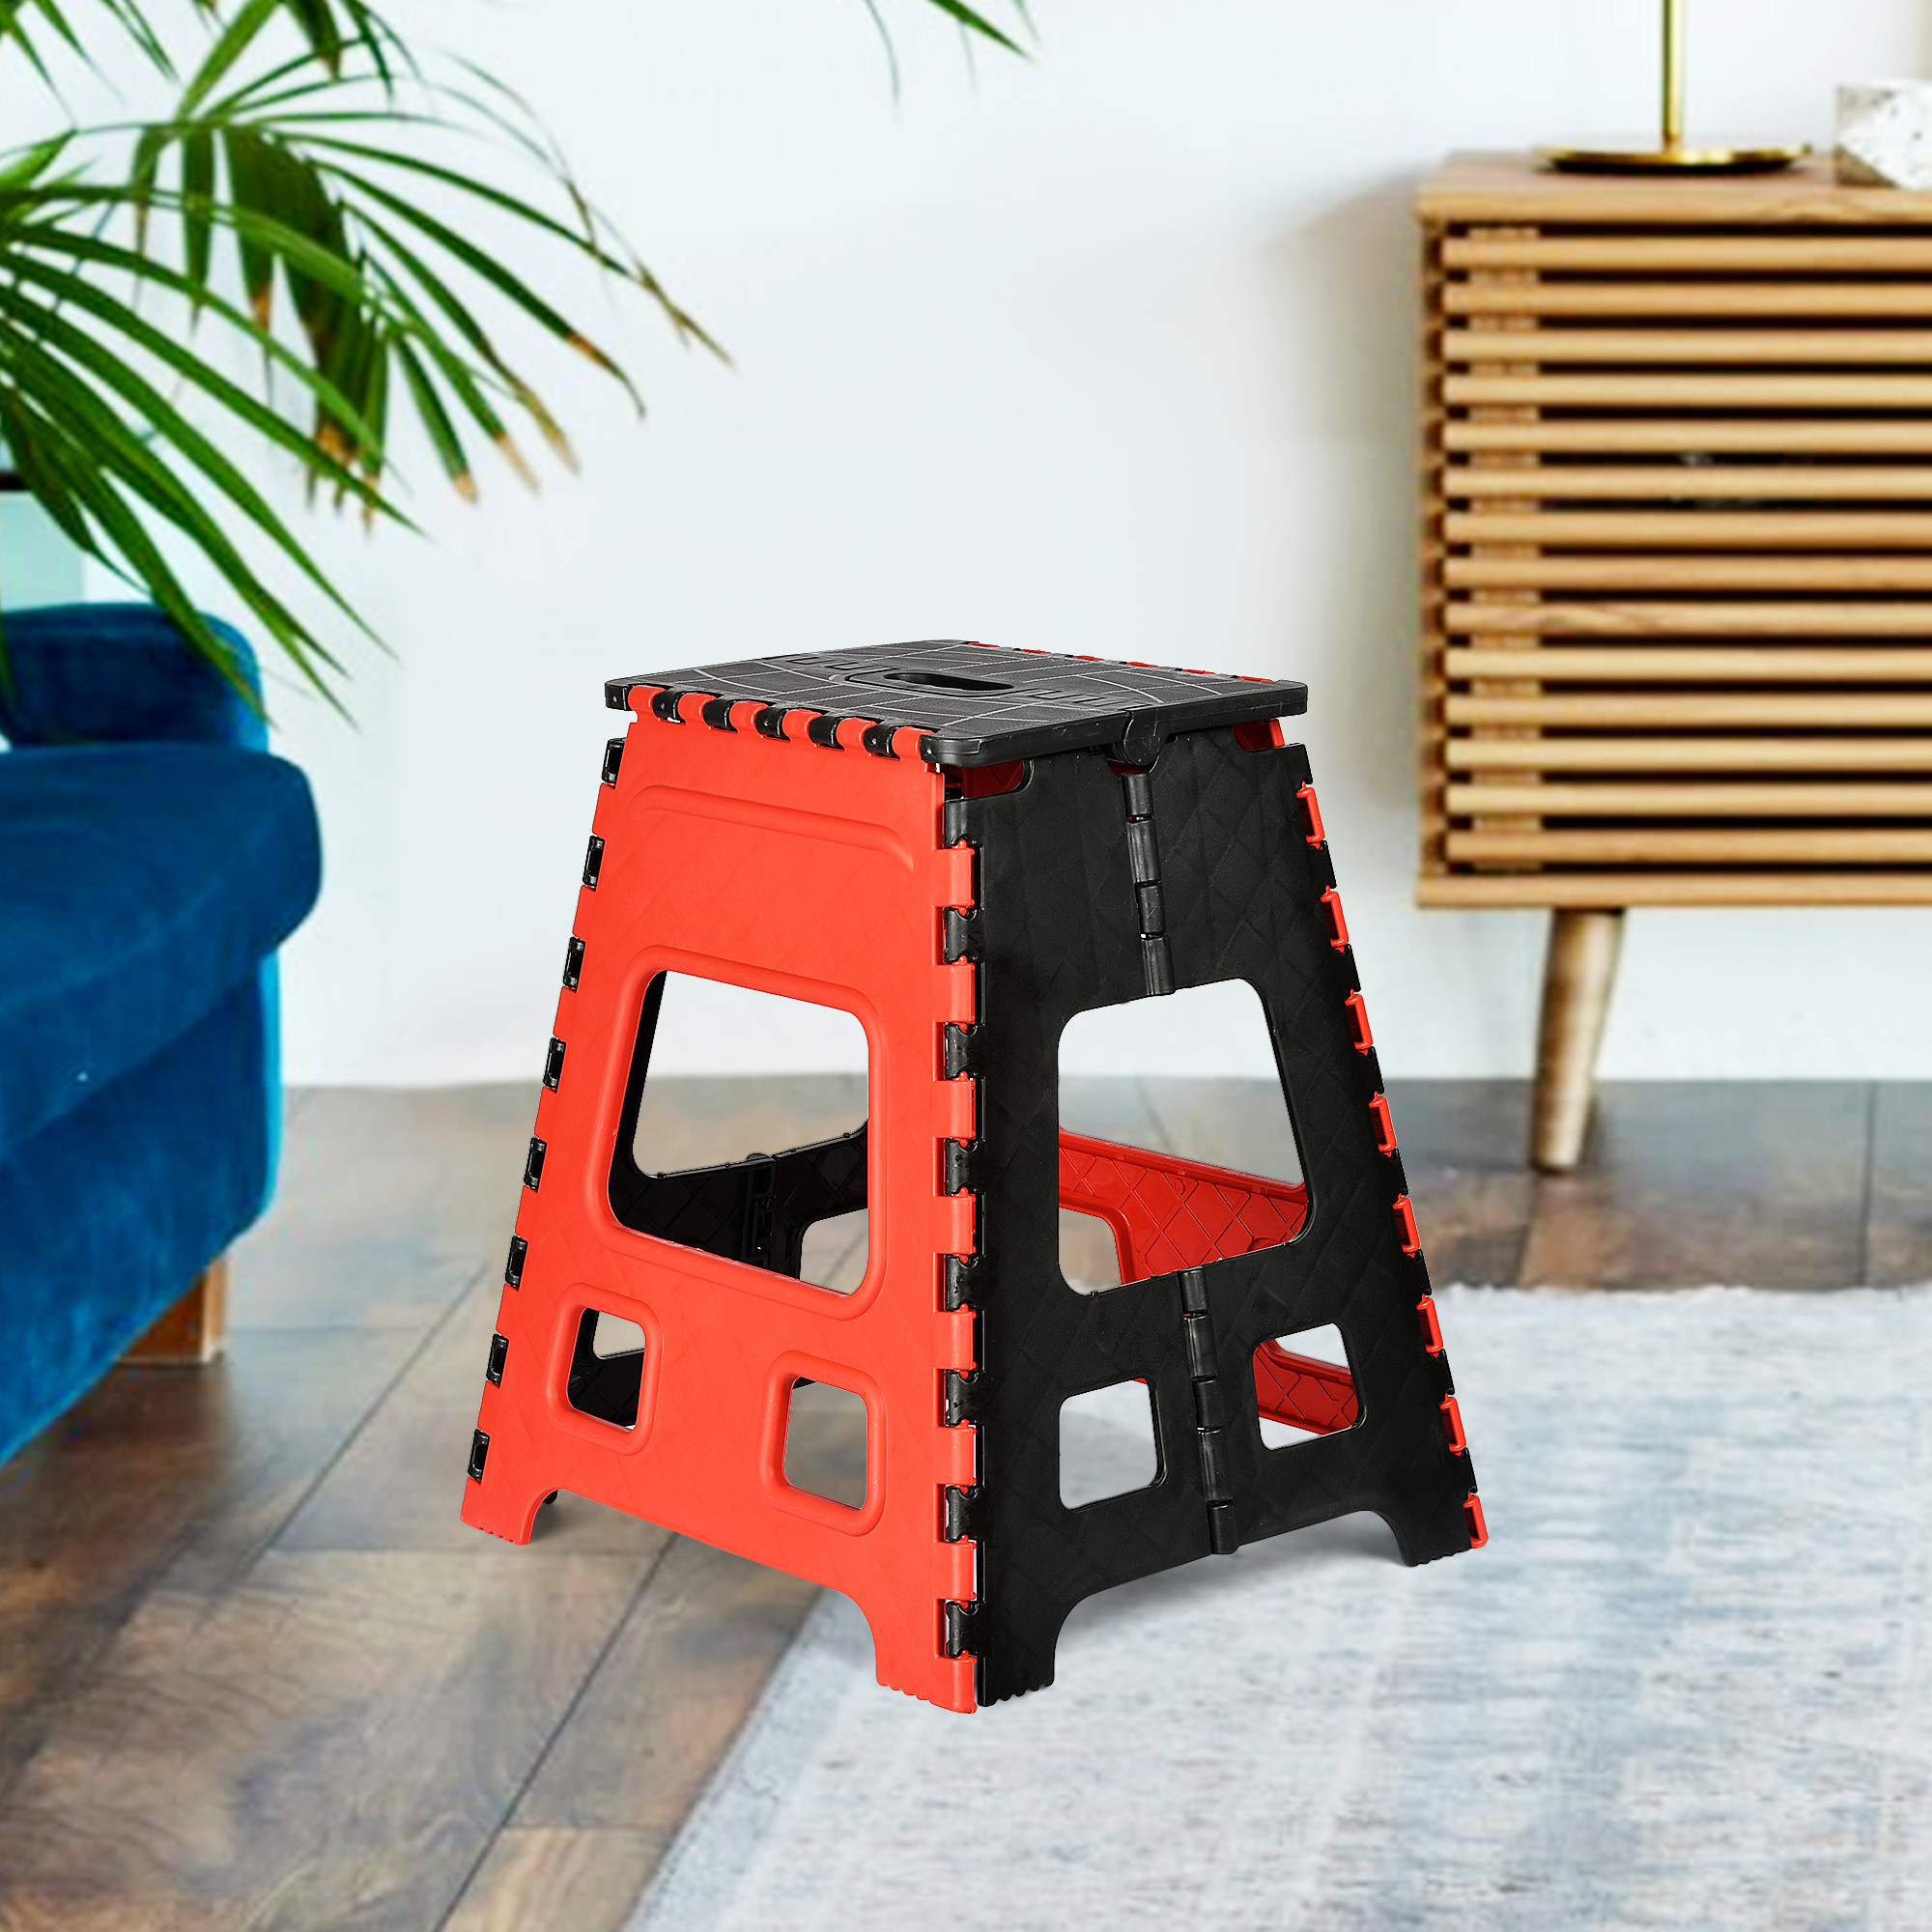 Kuber Industries Pack of 2 Stool | Portable & Foldable Stool | Collapsible Camping Chair | Stool for Outdoor-Fishing-Hiking-Garden-Travel | Multipurpose Sitting Stool | Large-Small | Red & Black